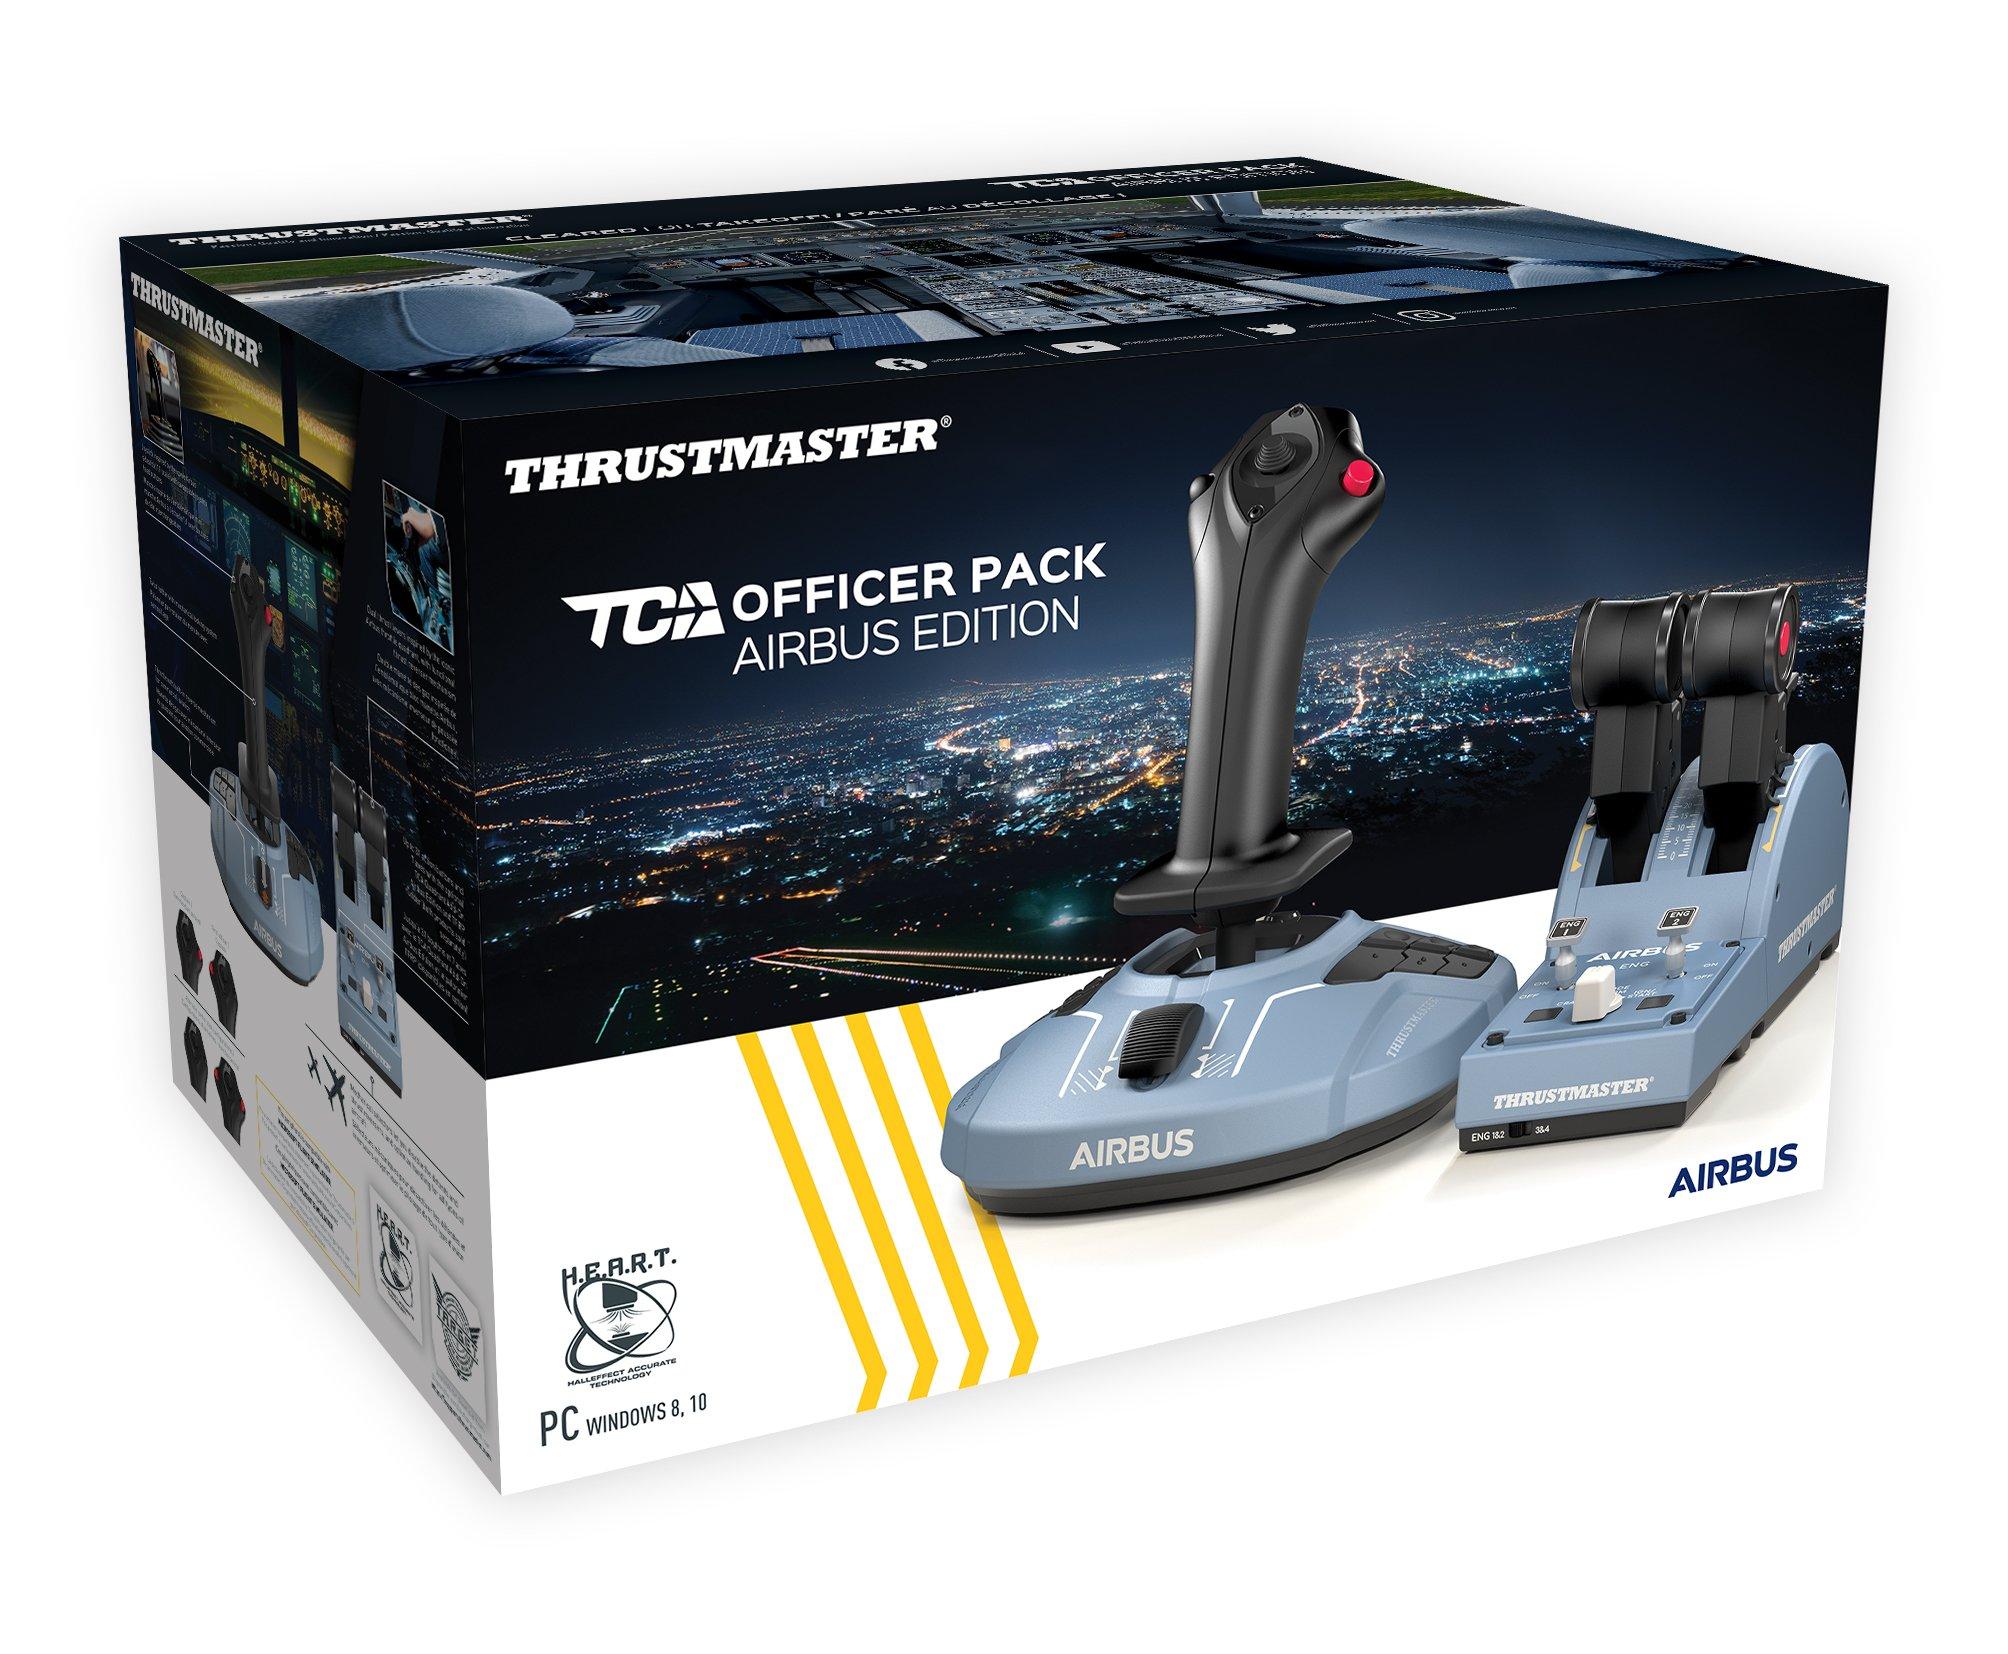 Thrustmaster TCA Officer Pack Airbus (A320) Edition Replica Flight Simulation Controls for PC